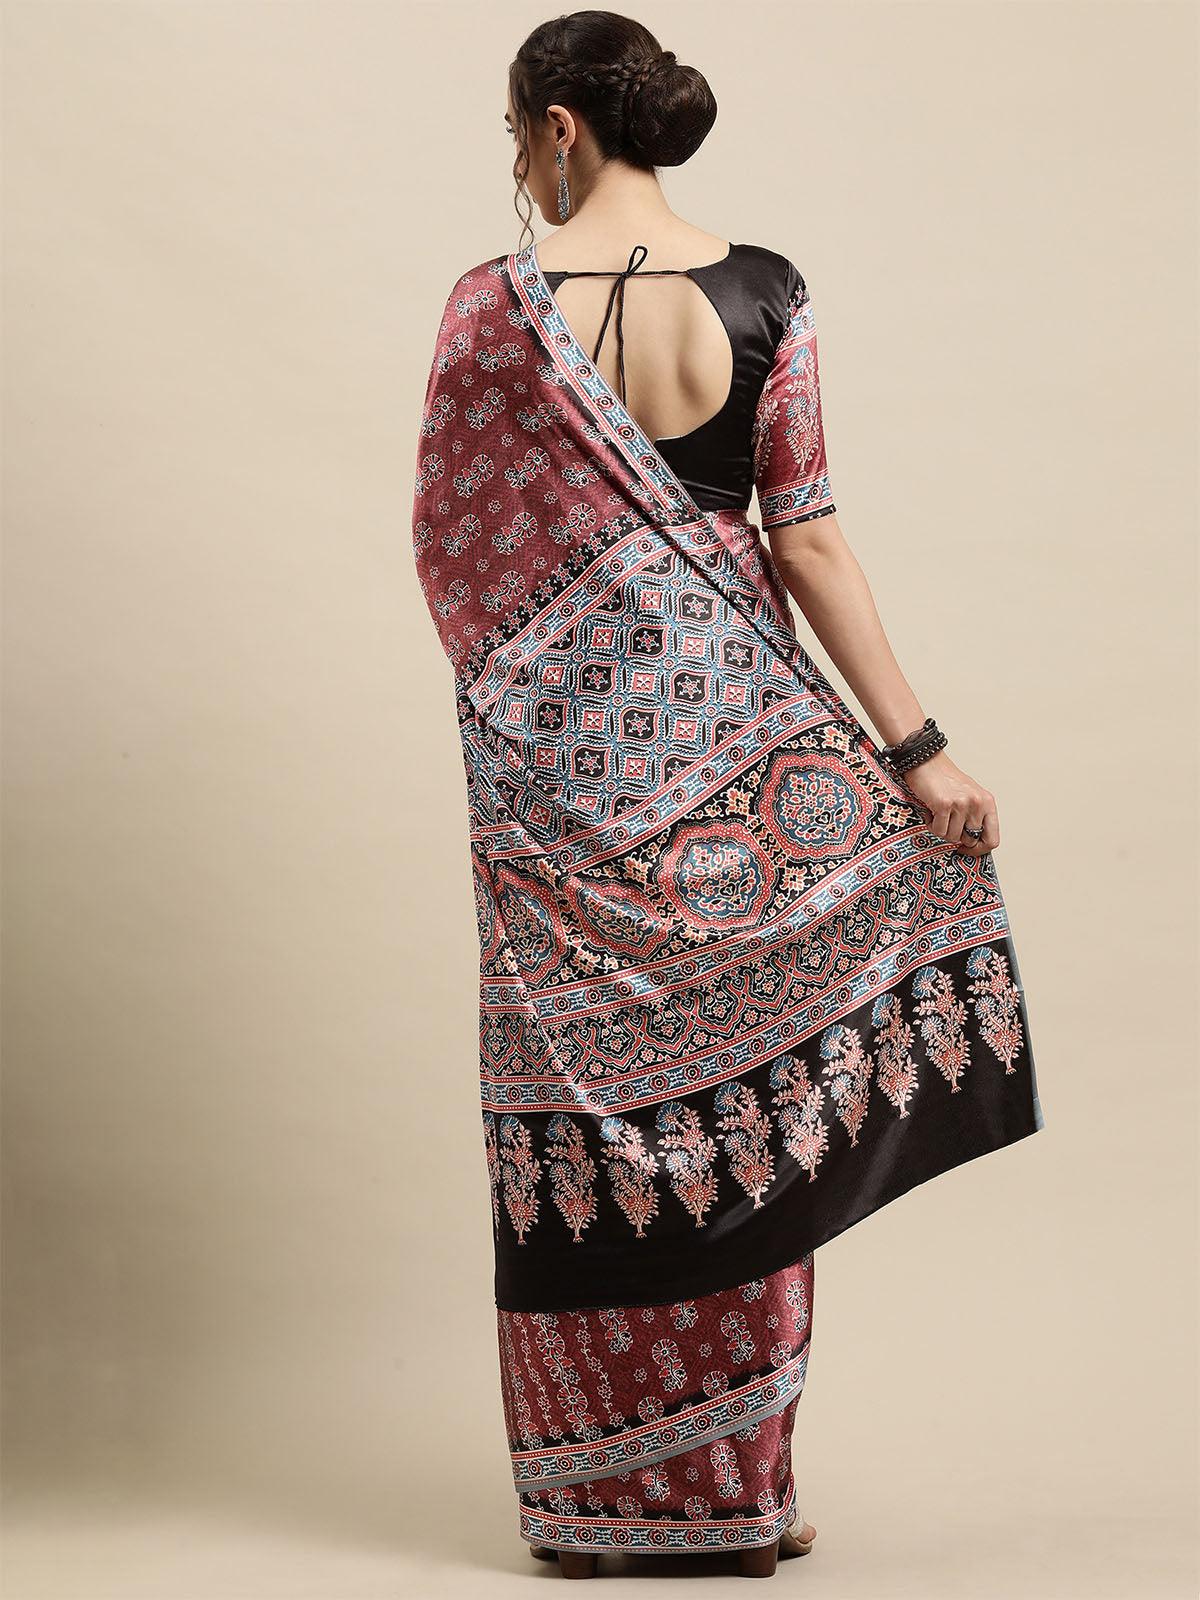 Women's Crepe Brown Printed Designer Saree With Blouse Piece - Odette